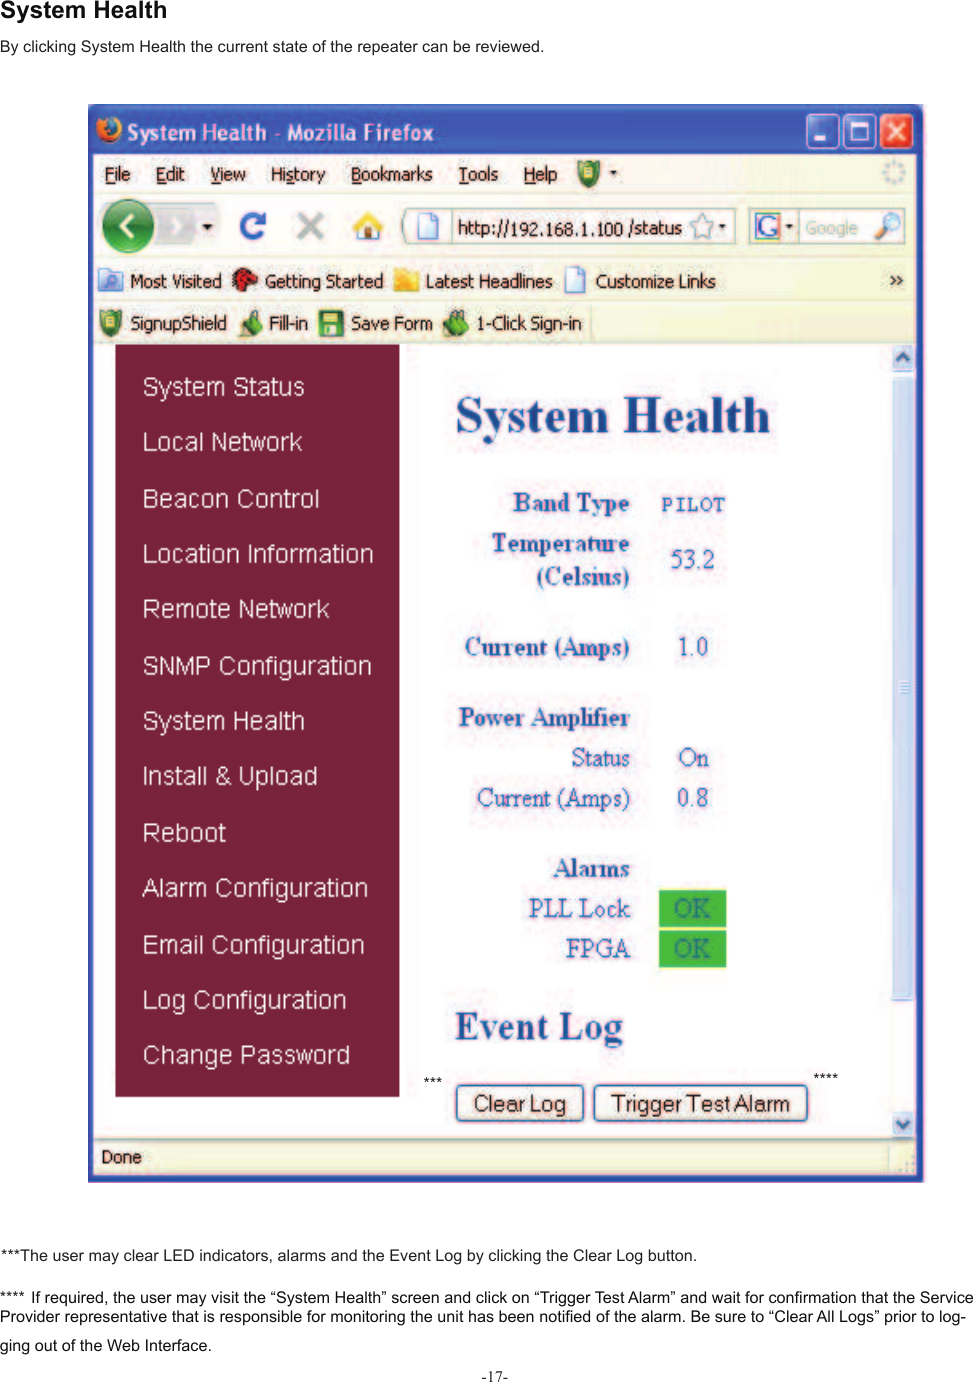 -17-By clicking System Health the current state of the repeater can be reviewed.  System Health**** If required, the user may visit the “System Health” screen and click on “Trigger Test Alarm” and wait for con! rmation that the Service Provider representative that is responsible for monitoring the unit has been noti! ed of the alarm. Be sure to “Clear All Logs” prior to log-ging out of the Web Interface.*******The user may clear LED indicators, alarms and the  Event Log by clicking the Clear Log button.***